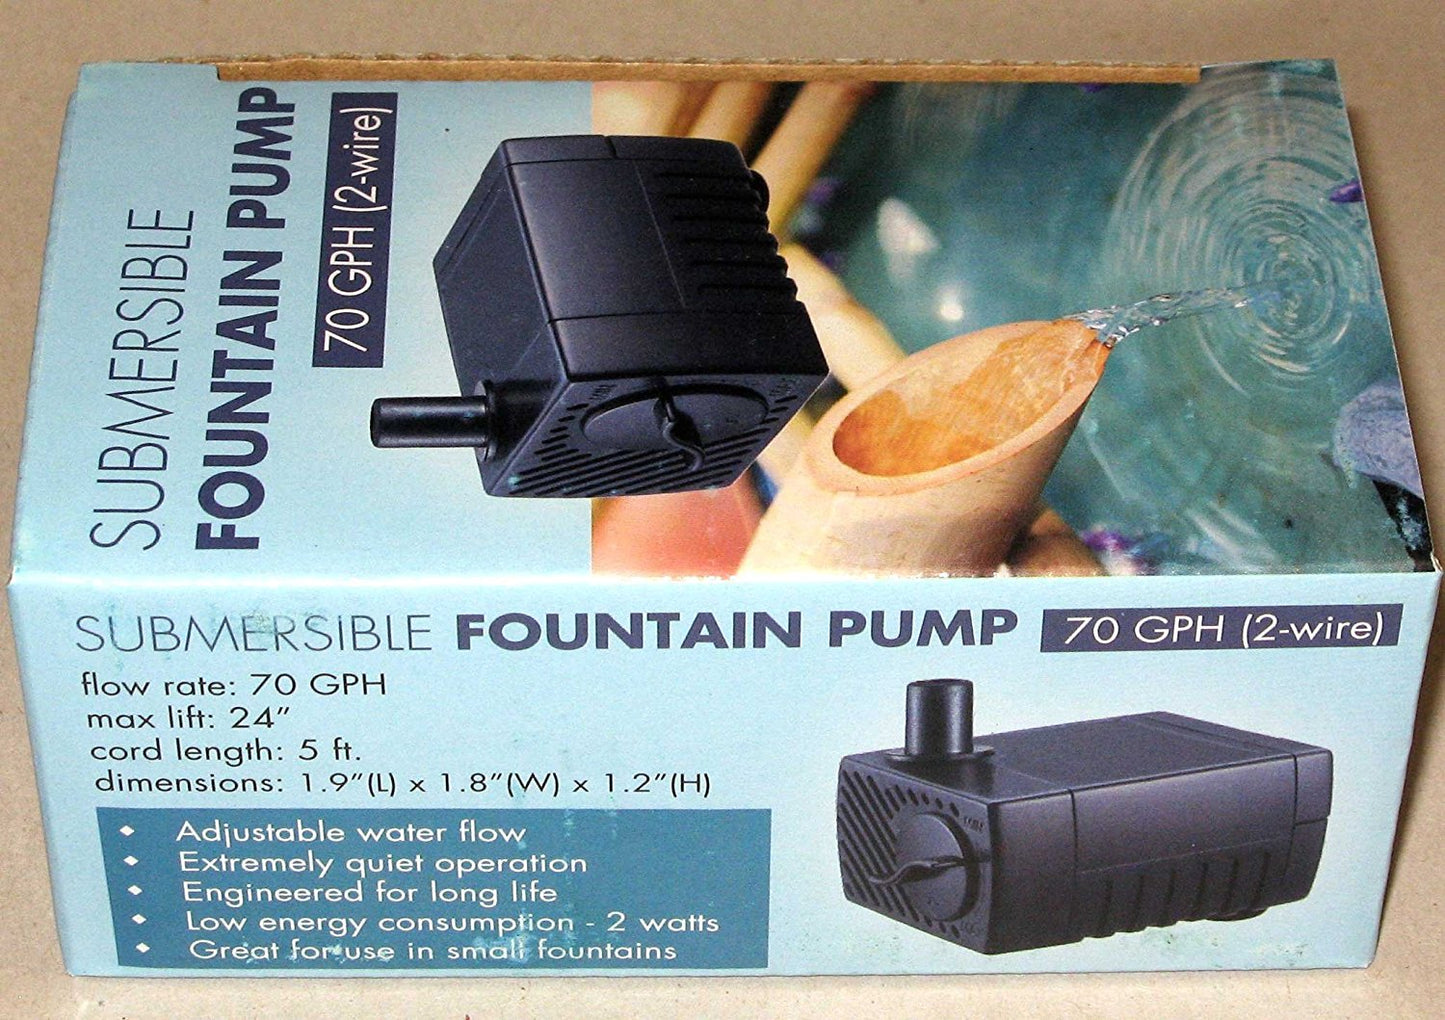 Jebao 70GPH 120V Submersible Fountain Pump (2-Wire), PP-333